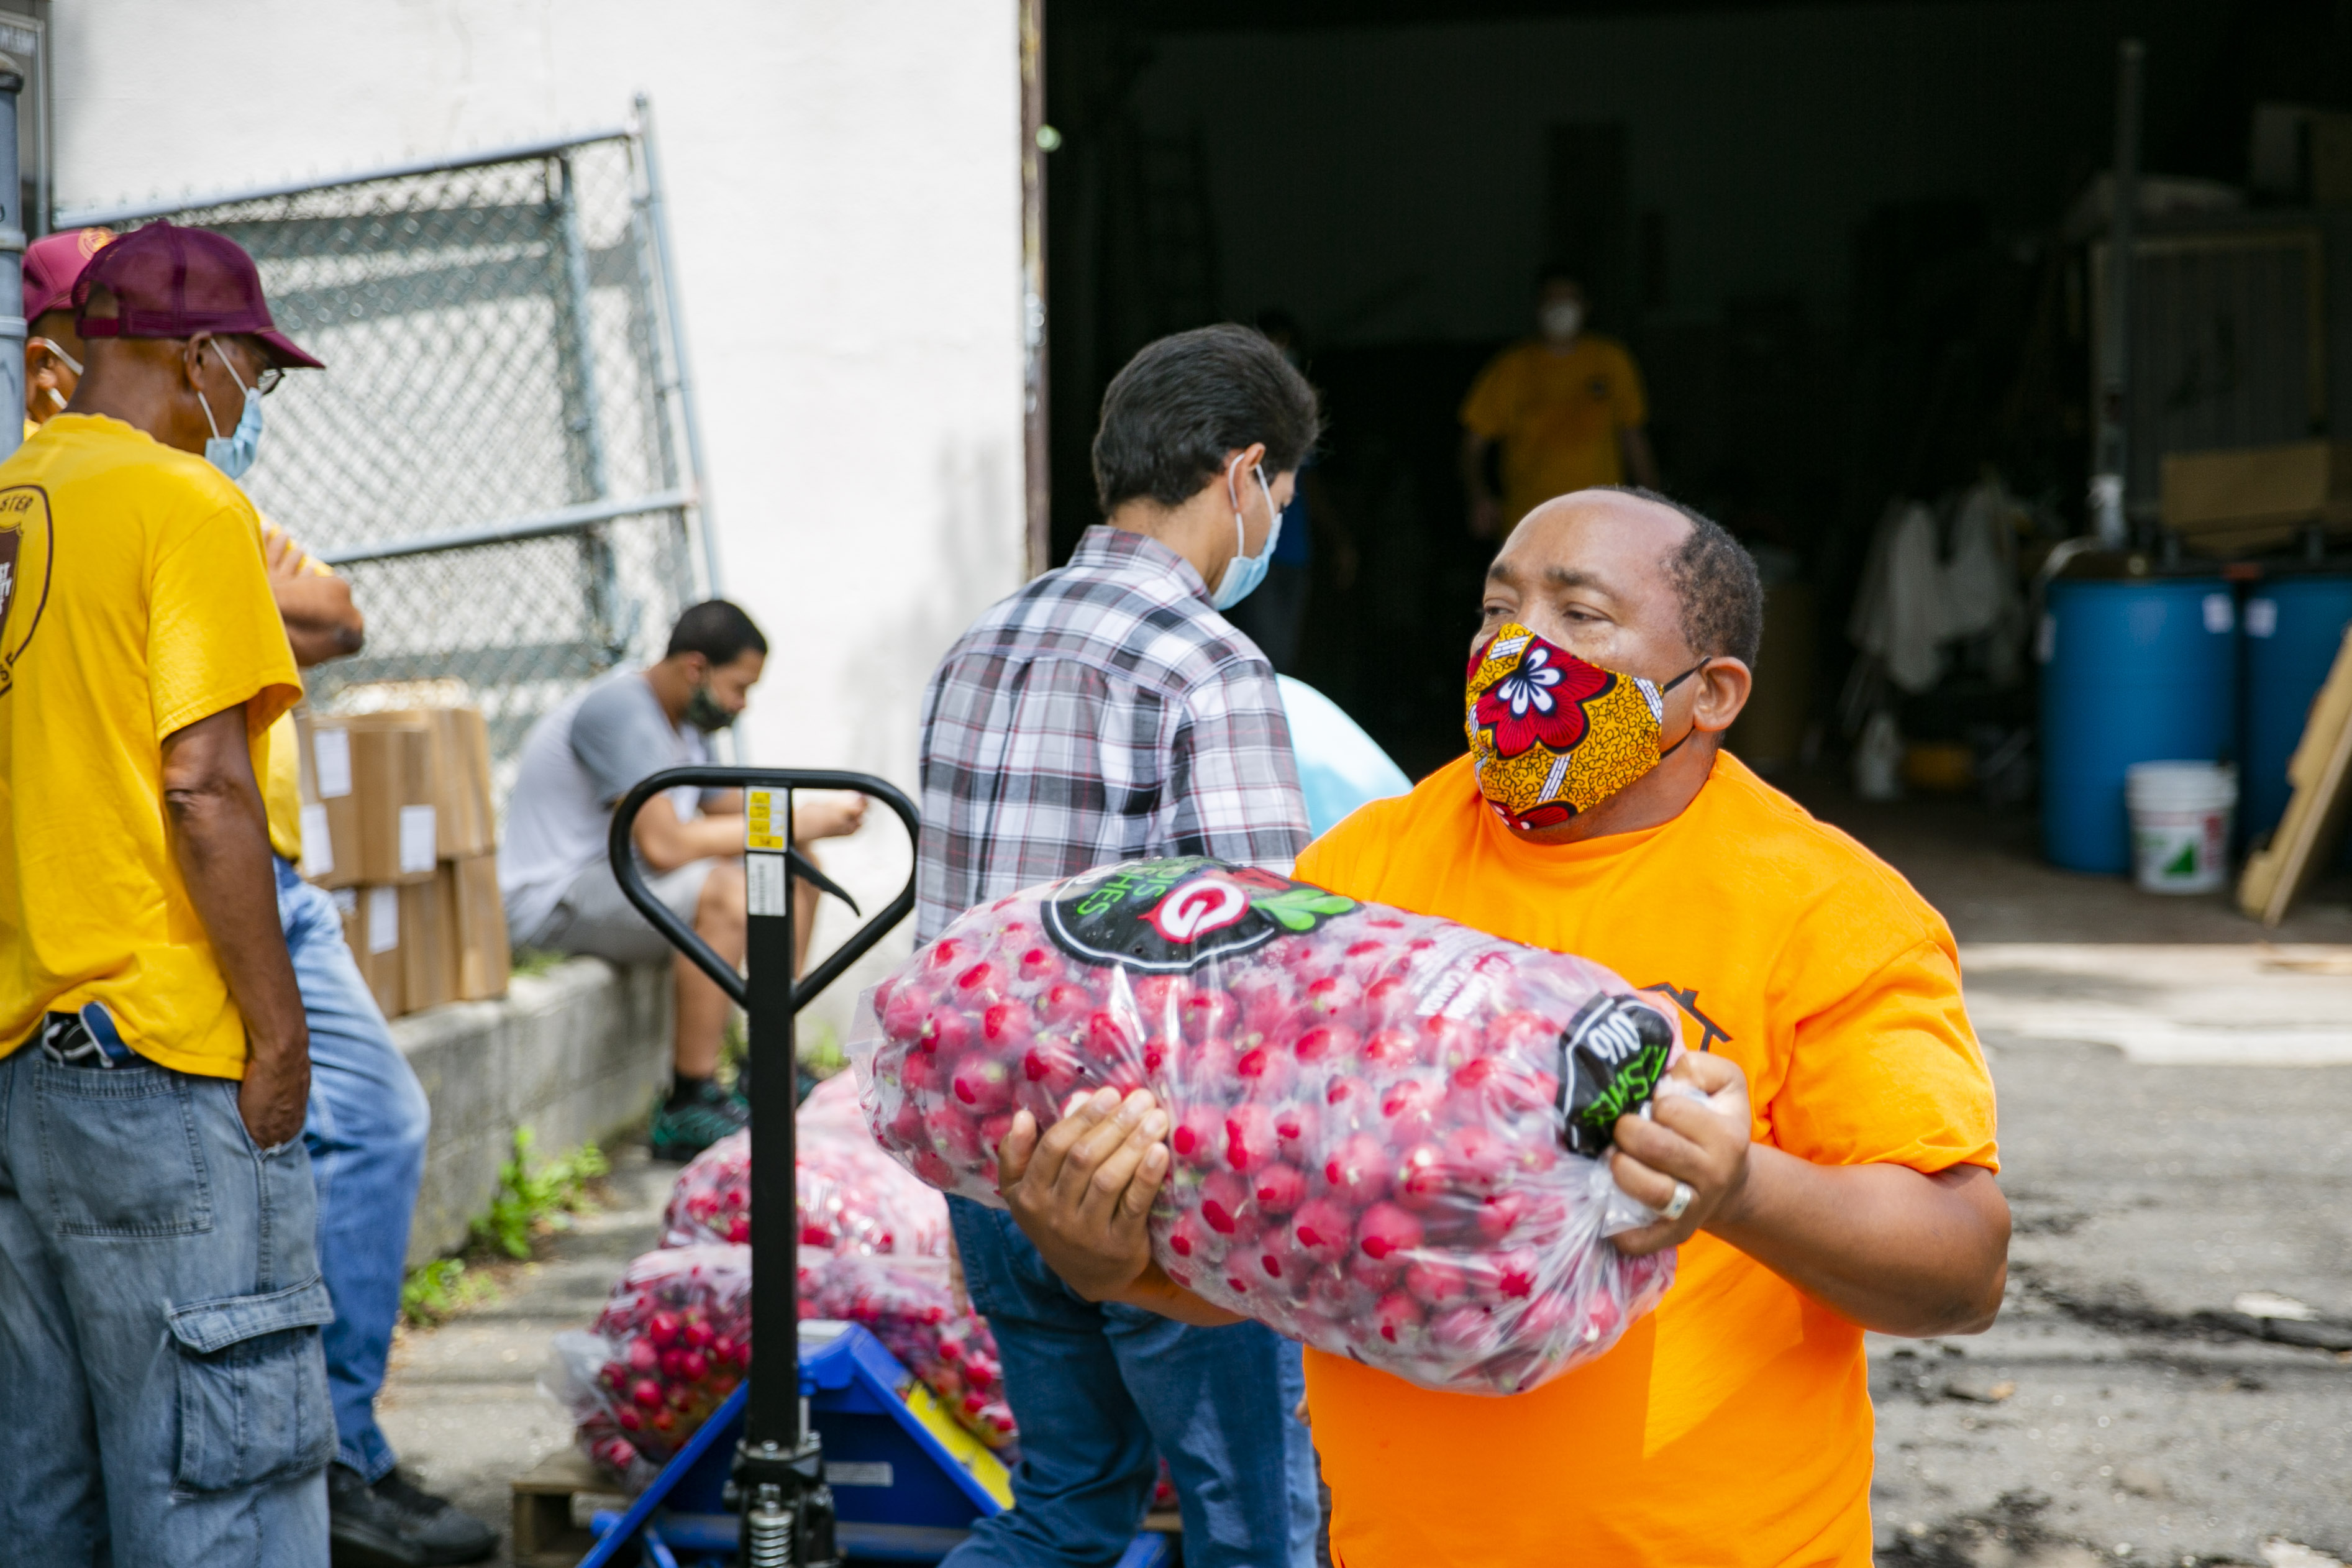 ACS workers unload produce from the City Harvest truck that delivered 12 pallets of food on July 13. Photo: JeNean Lendor